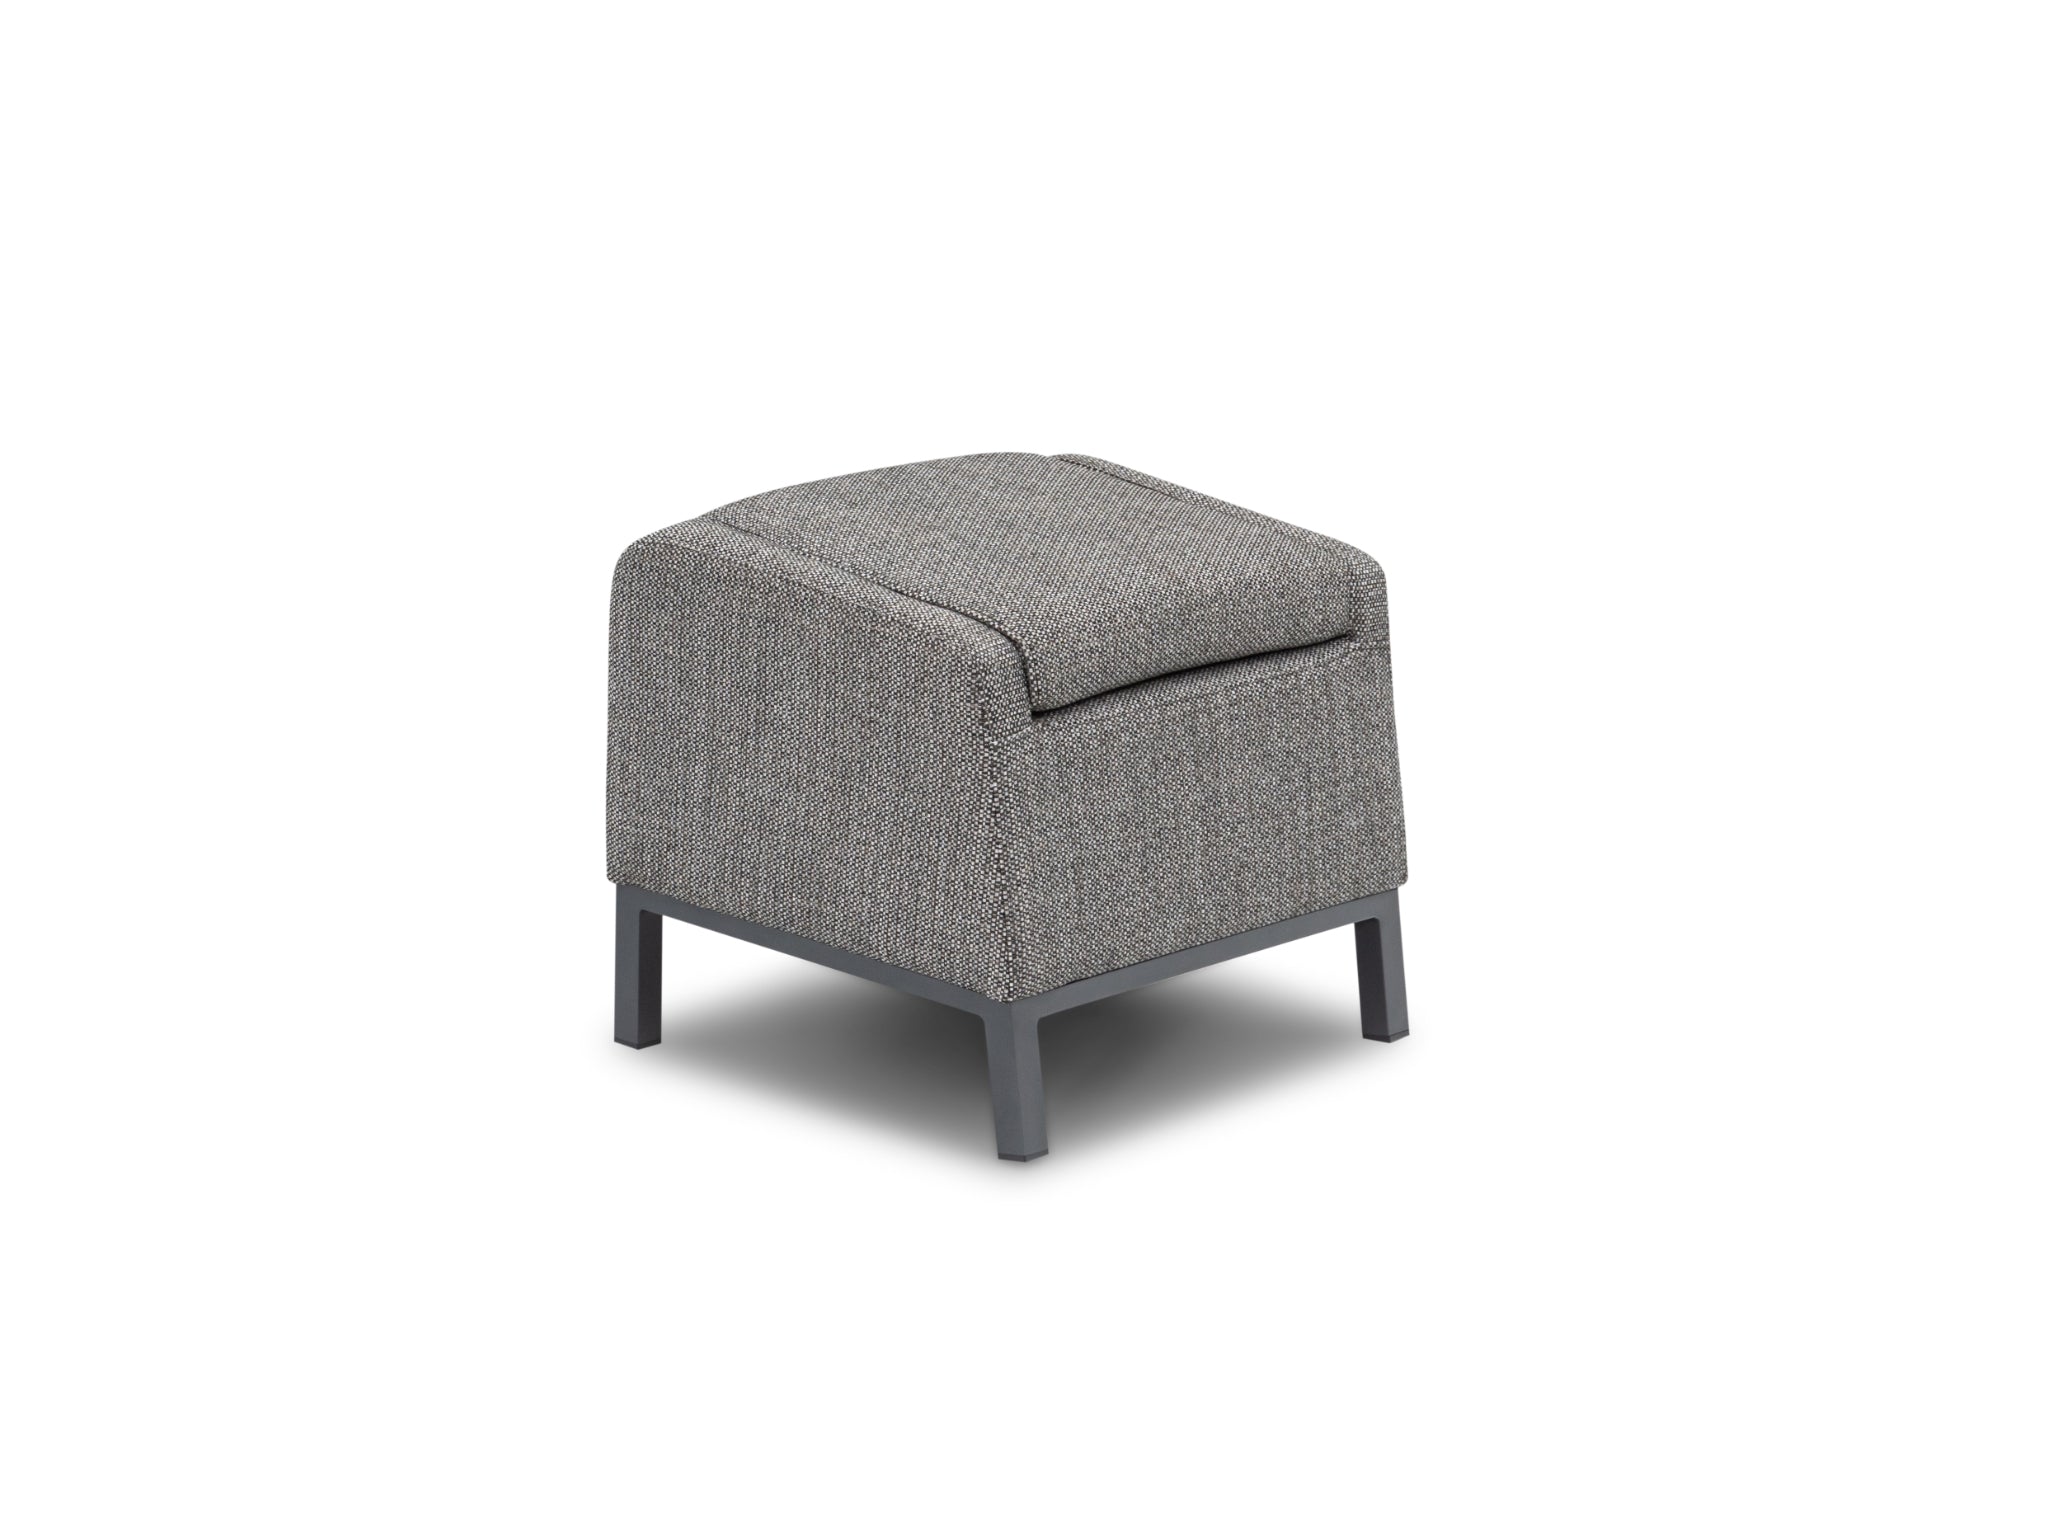 SIMPO by Sunlongarden Peter Footstool